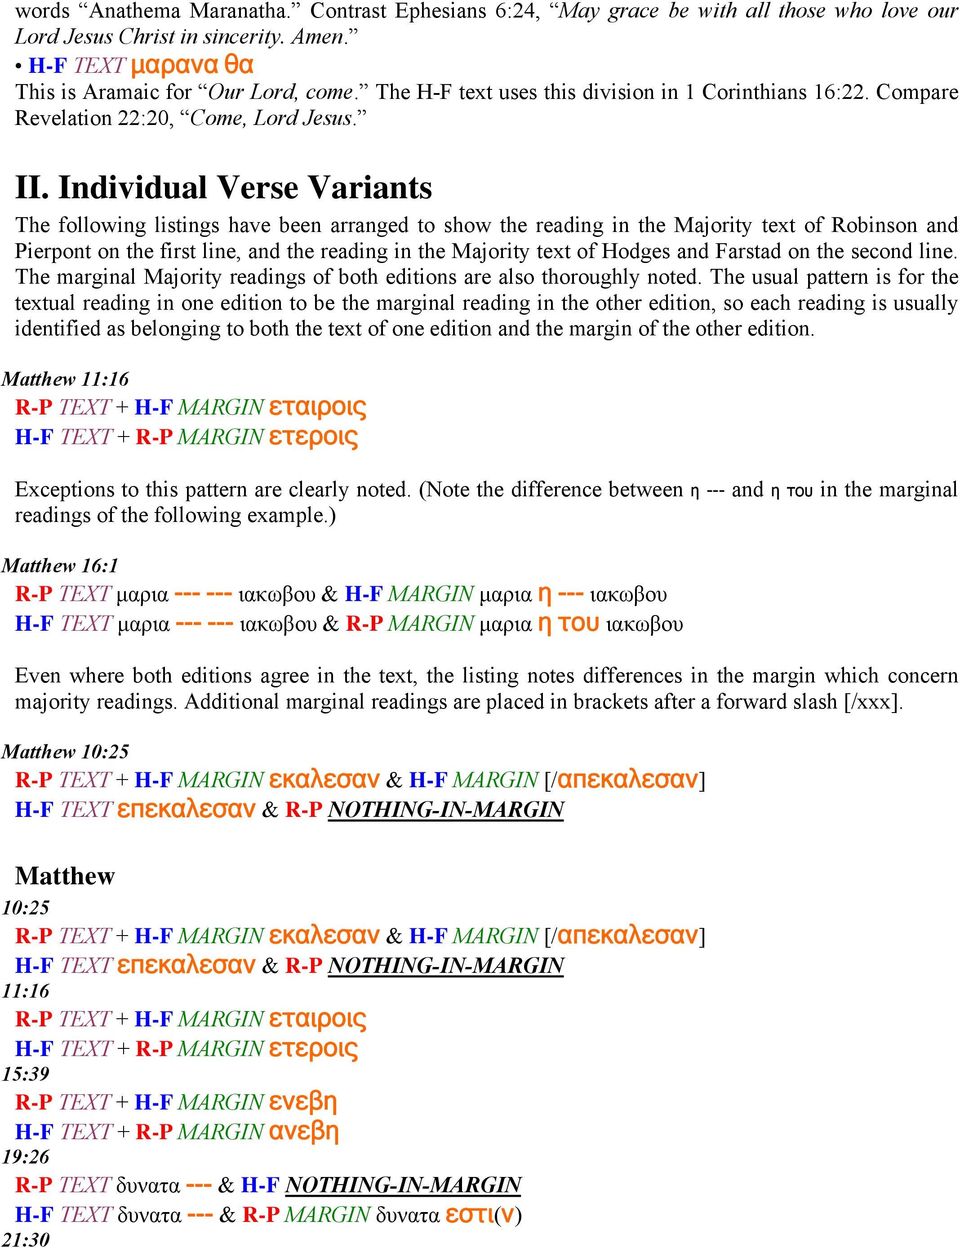 Individual Verse Variants The following listings have been arranged to show the reading in the Majority text of Robinson and Pierpont on the first line, and the reading in the Majority text of Hodges